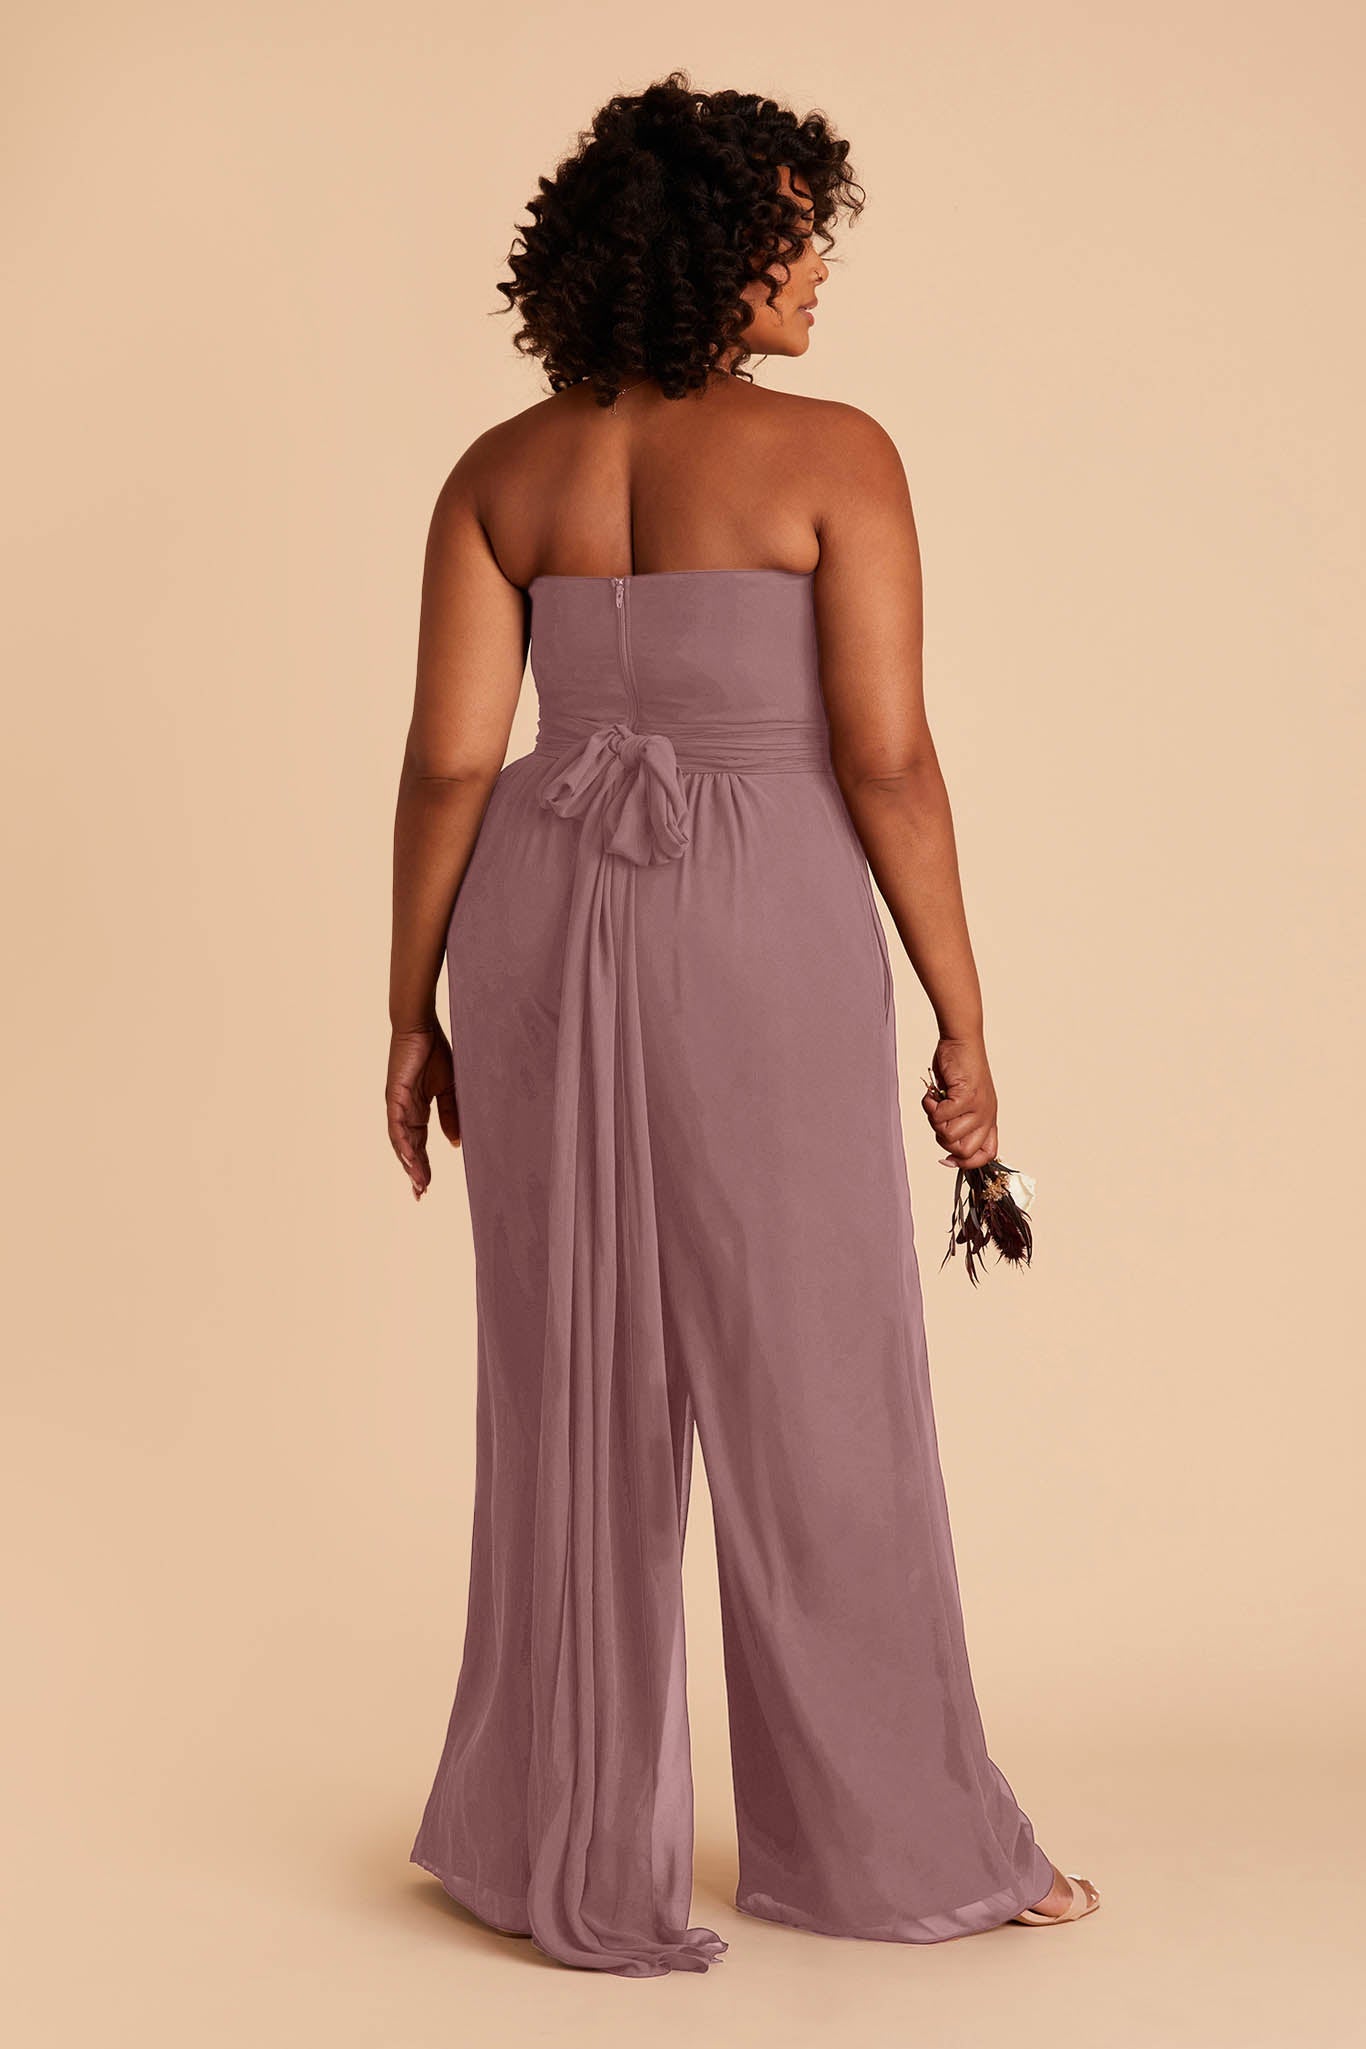 Purple plus size wedding jumpsuit with convertible neckline with tie in the back